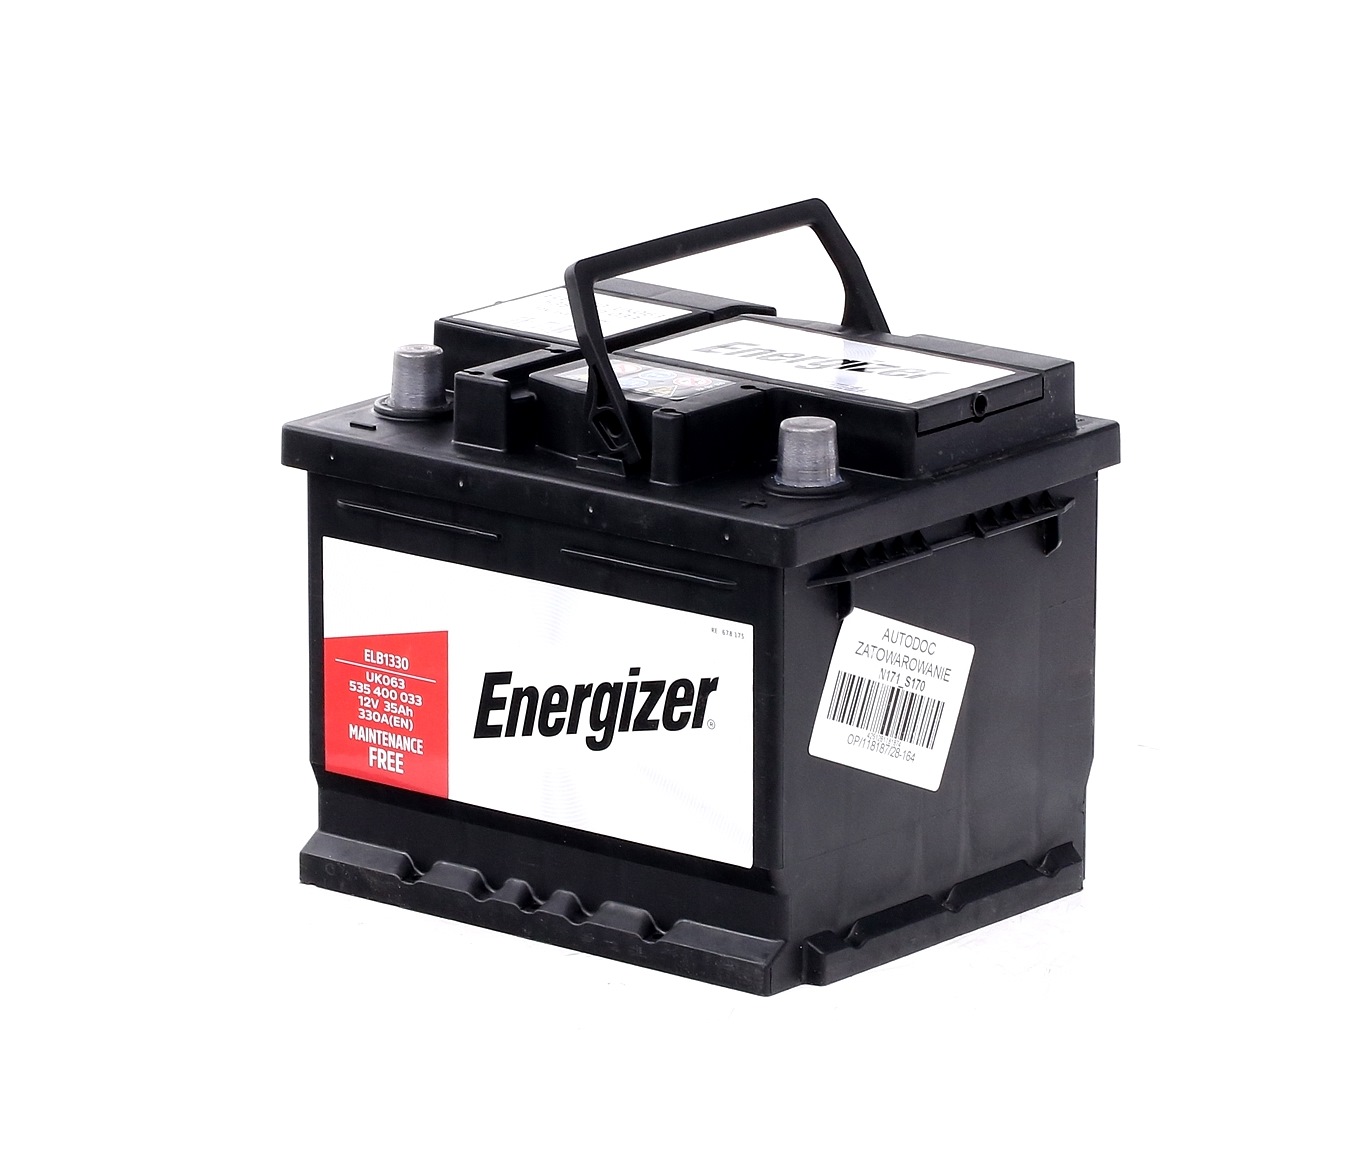 Car spare parts VW FRIDOLIN 1969: Starter Battery ENERGIZER E-LB1 330 at a discount — buy now!